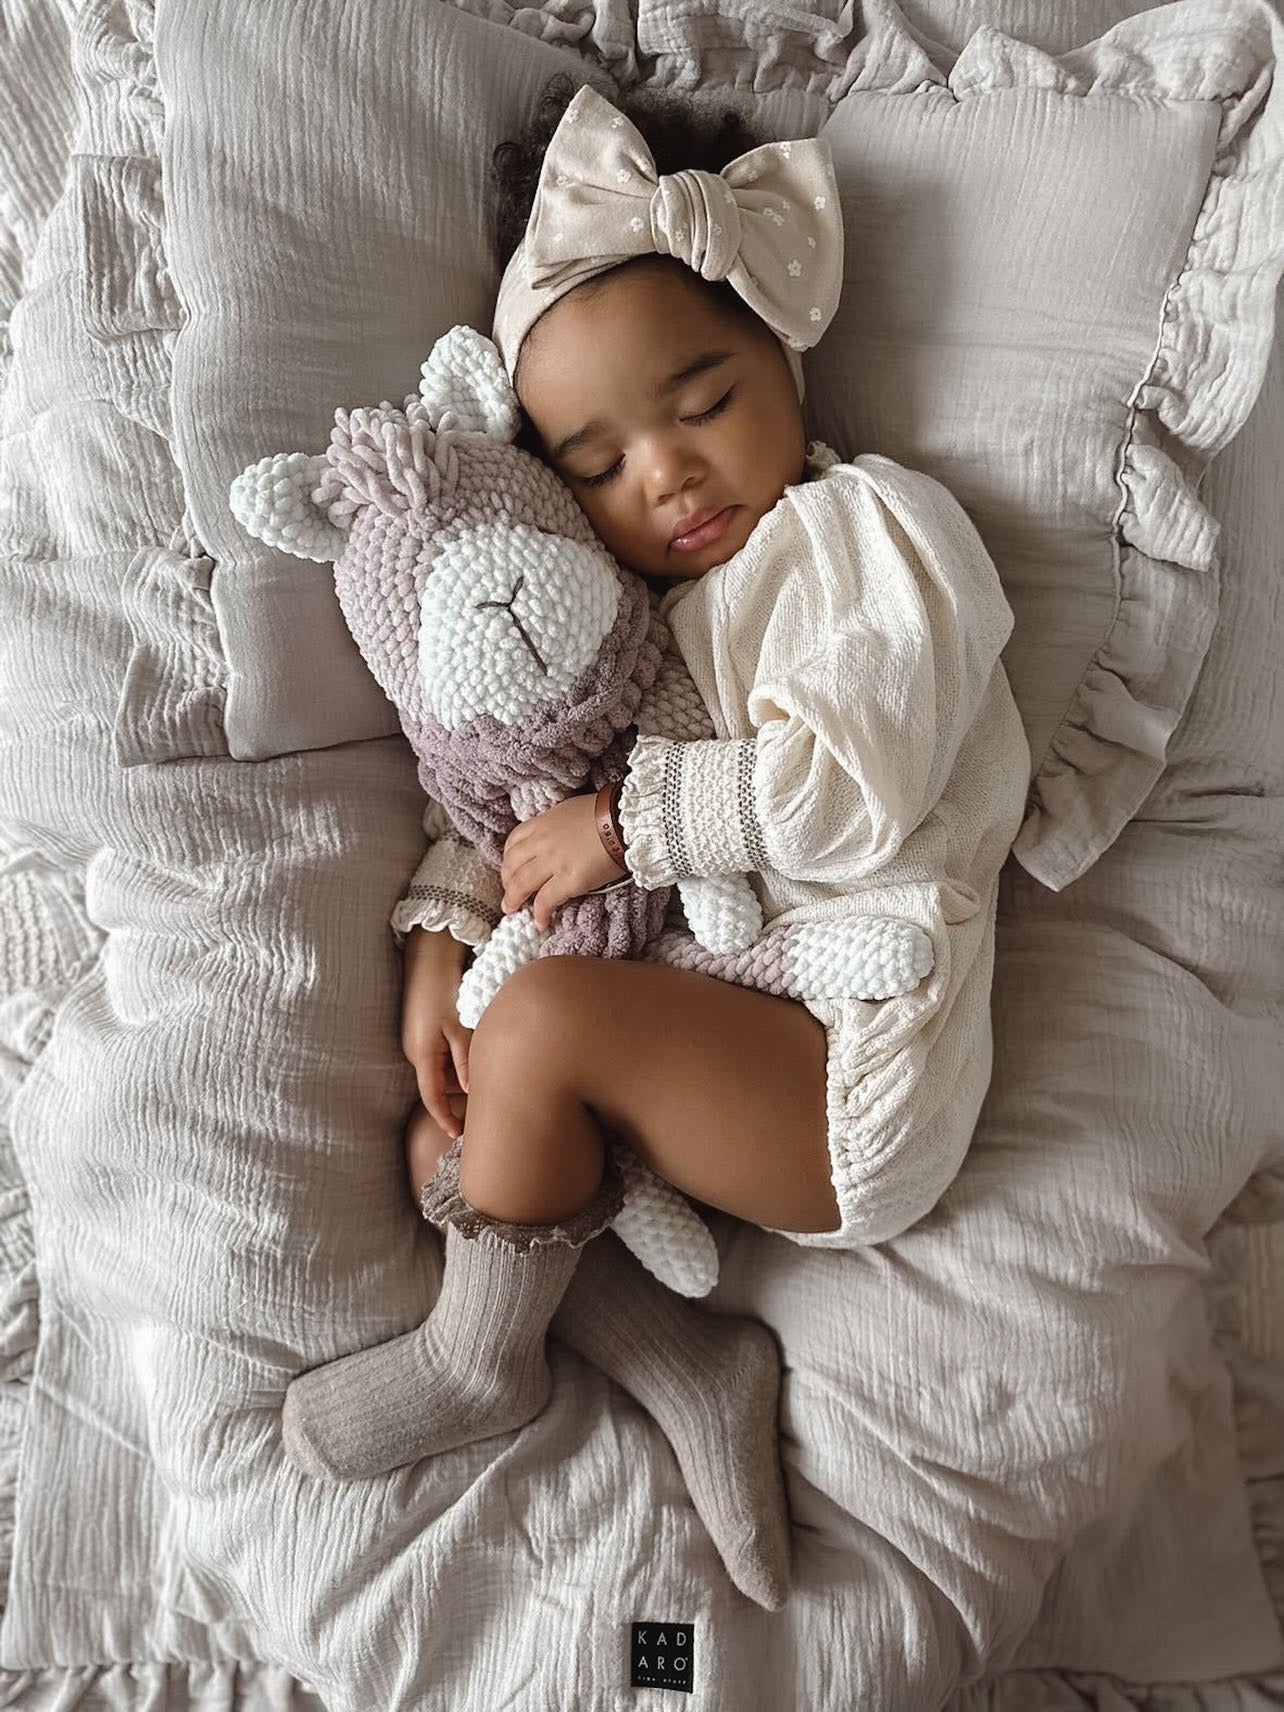 a baby laying on a bed next to a stuffed alpaca toy in neutral colours.